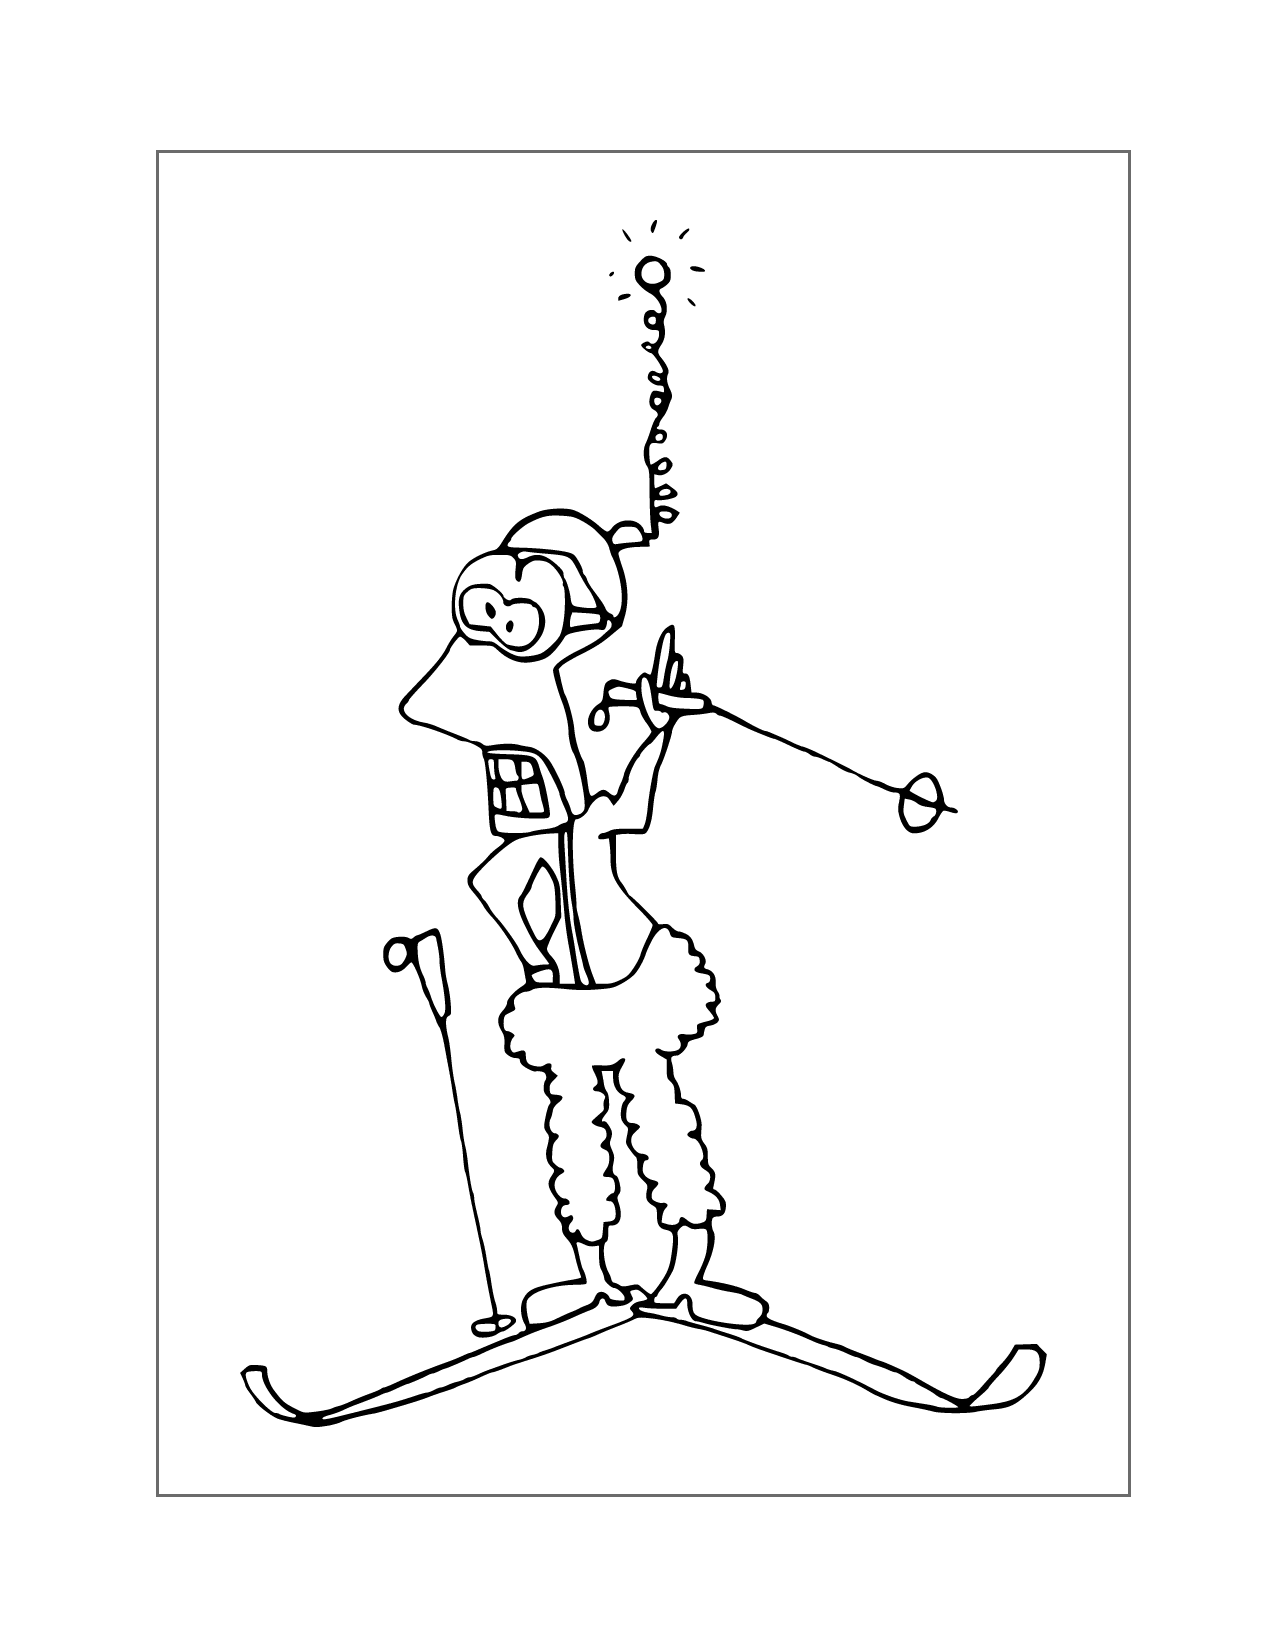 Silly Skiier Coloring Page